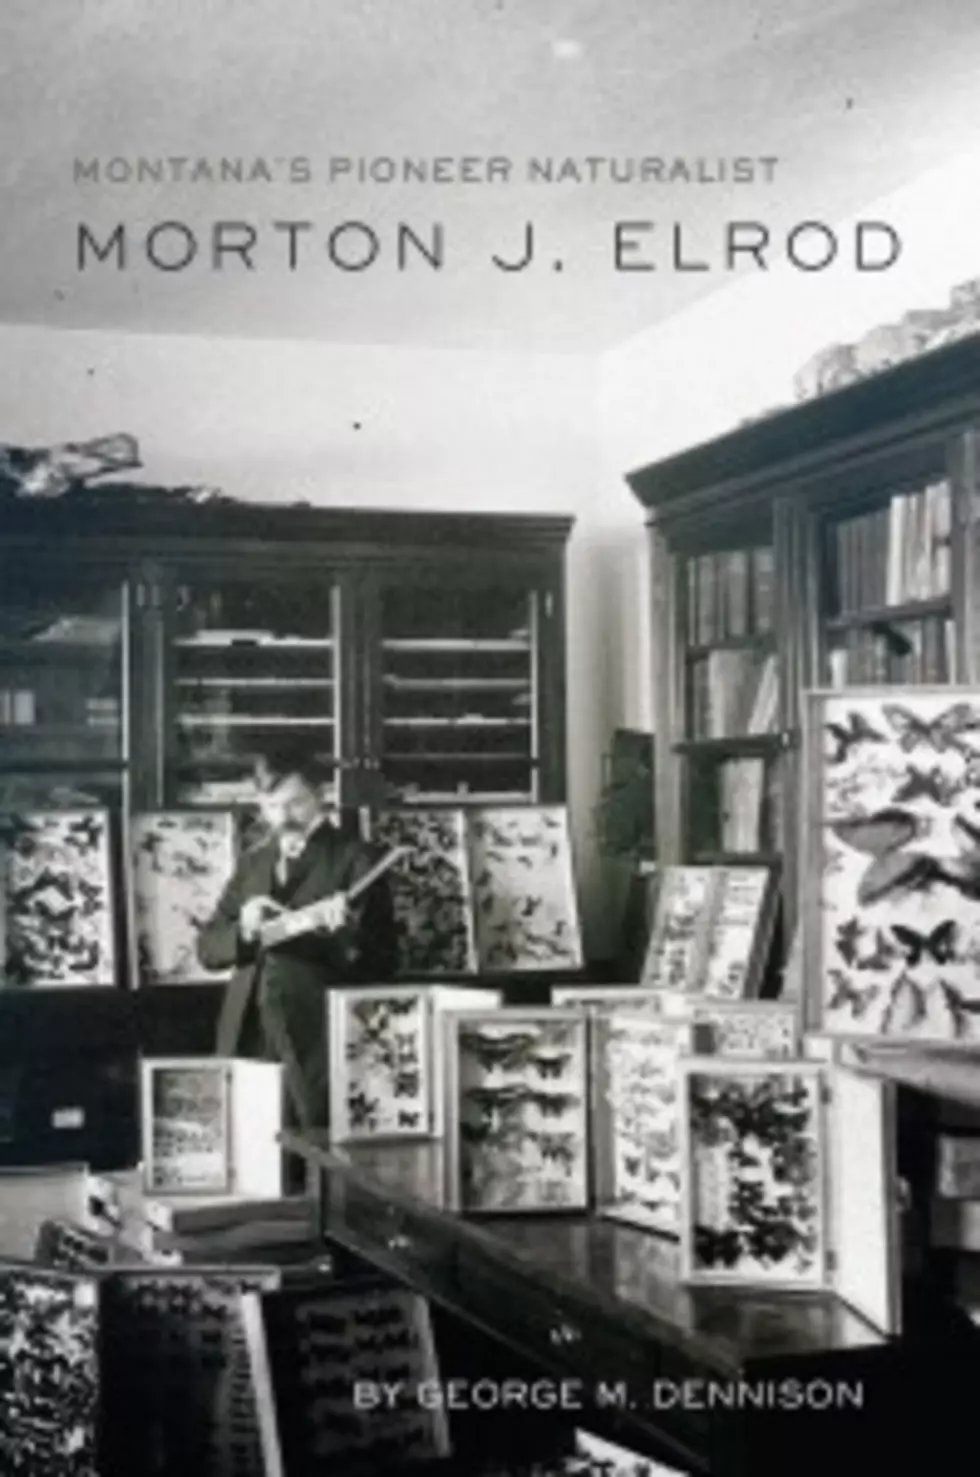 New Biography Available about Esteemed Montana Naturalist